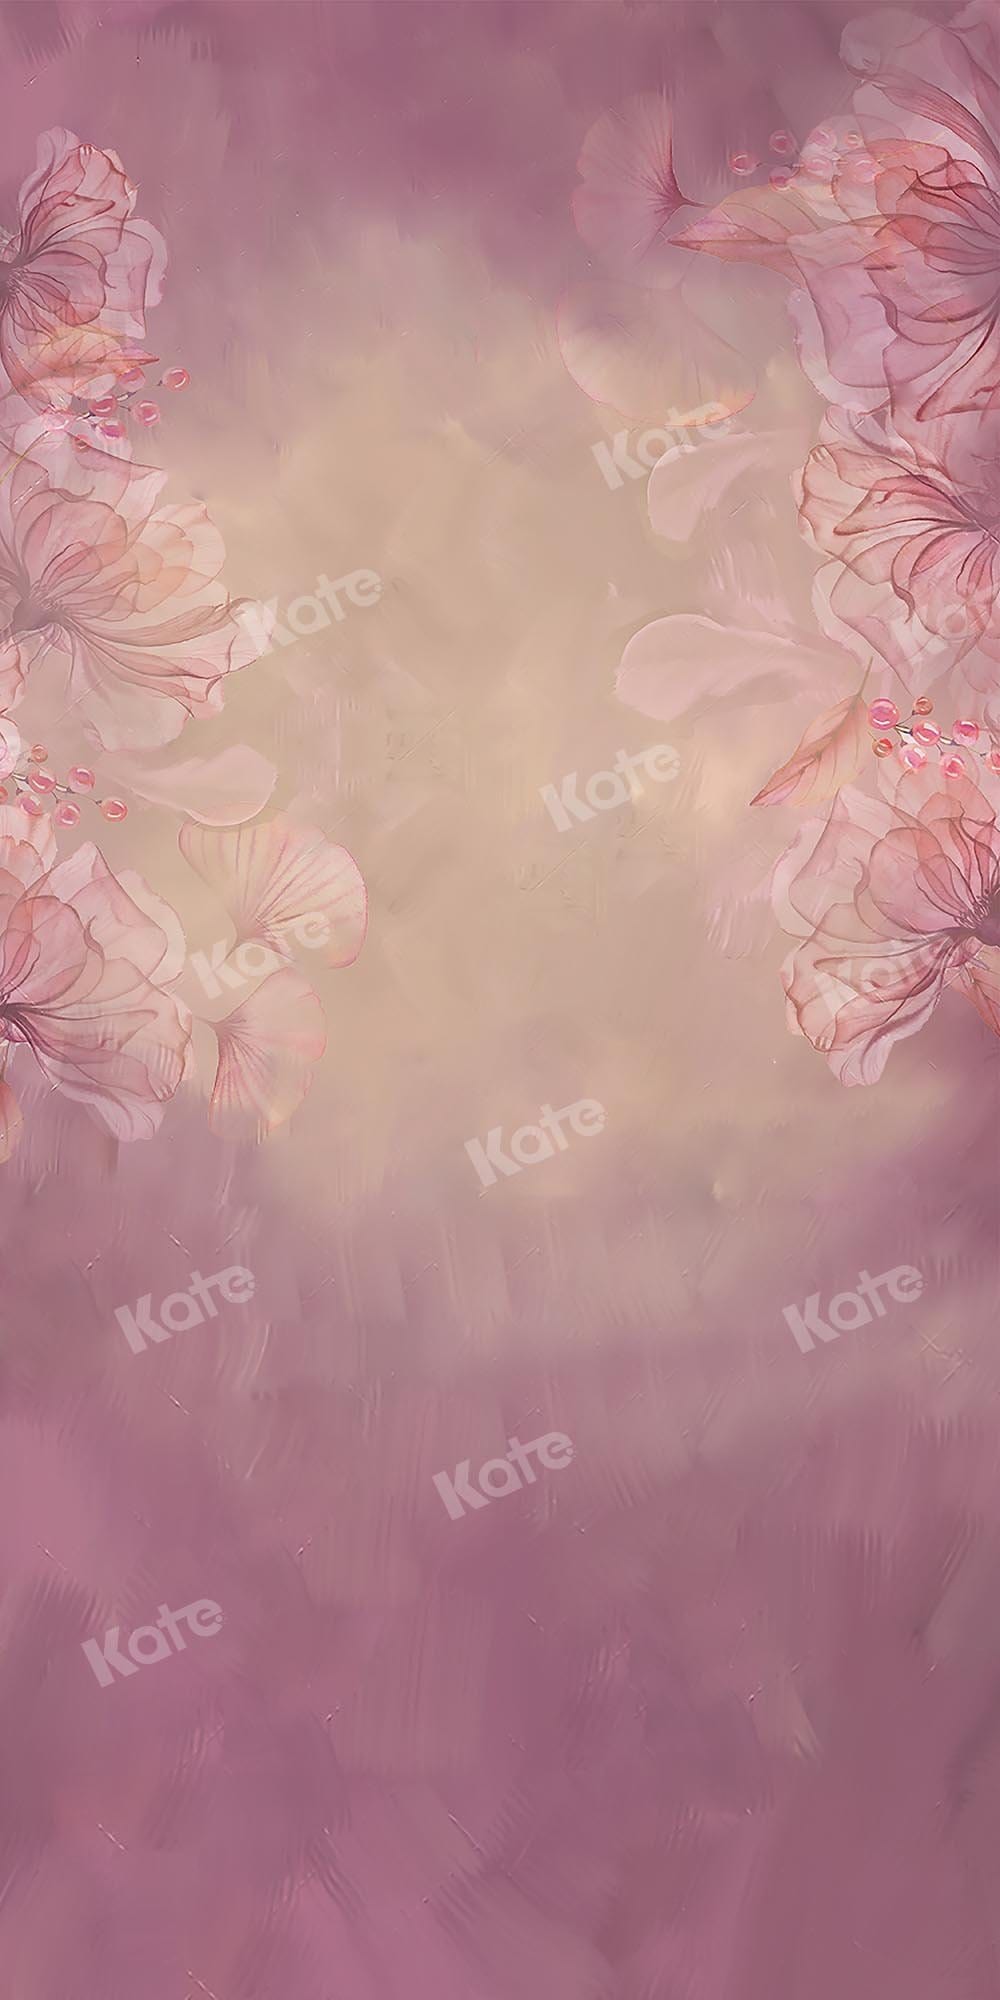 Kate Sweep Fine Art Floral Blurry Pink Backdrop Designed by GQ